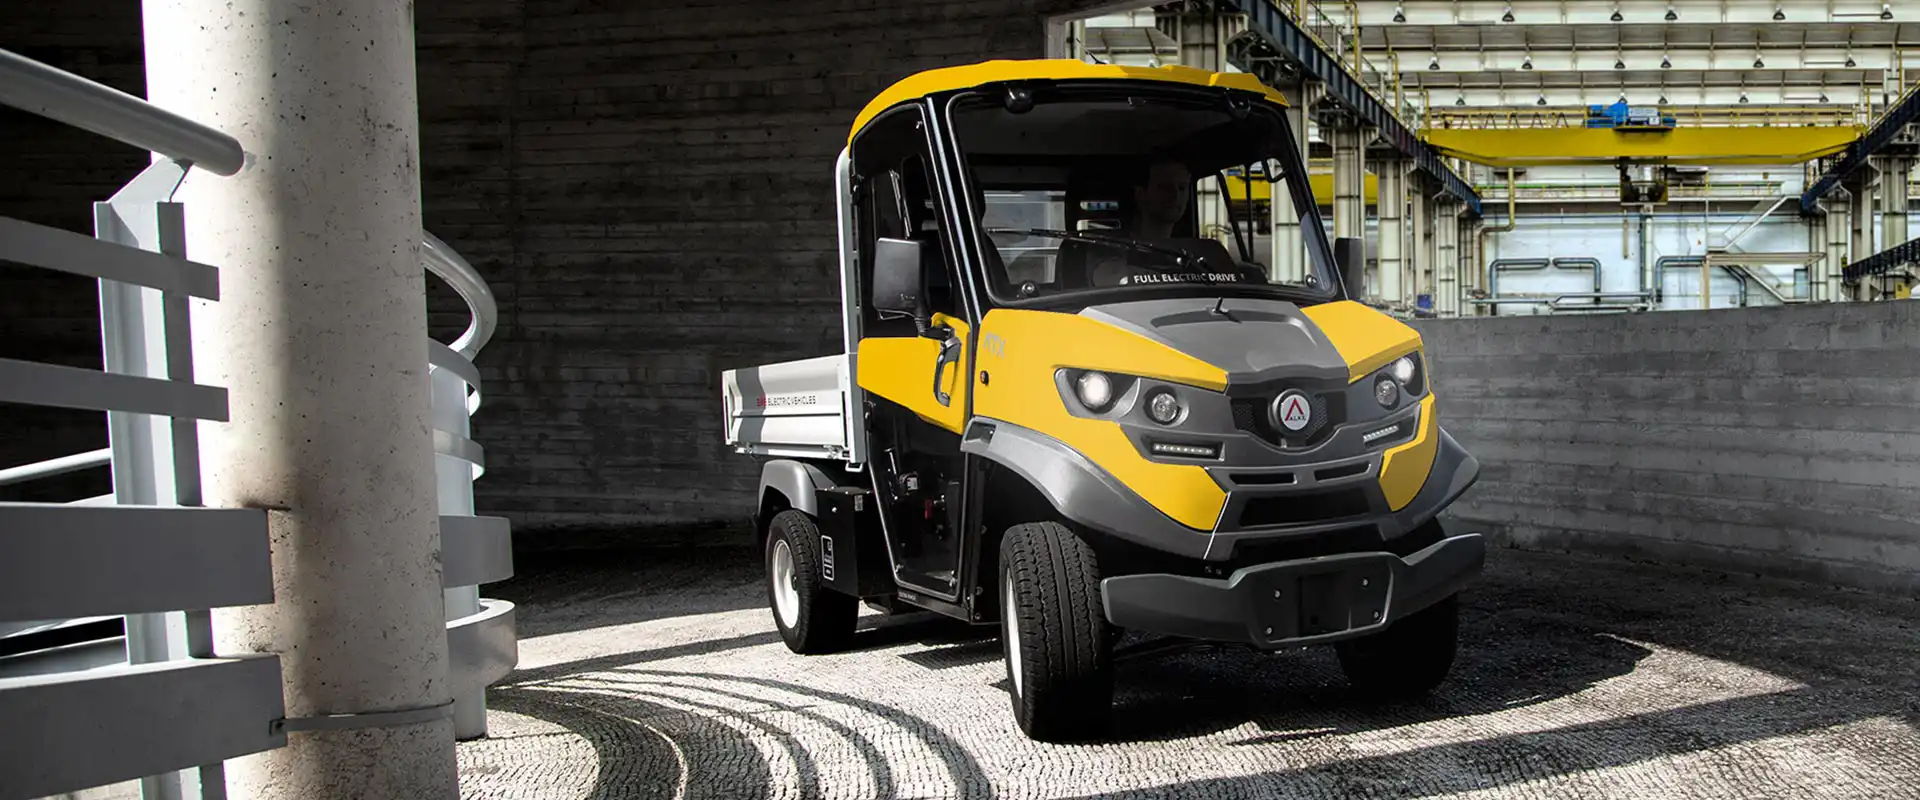 Fast charge for electric utility vehicles? - Electric vehicles: choose between normal and fast charge